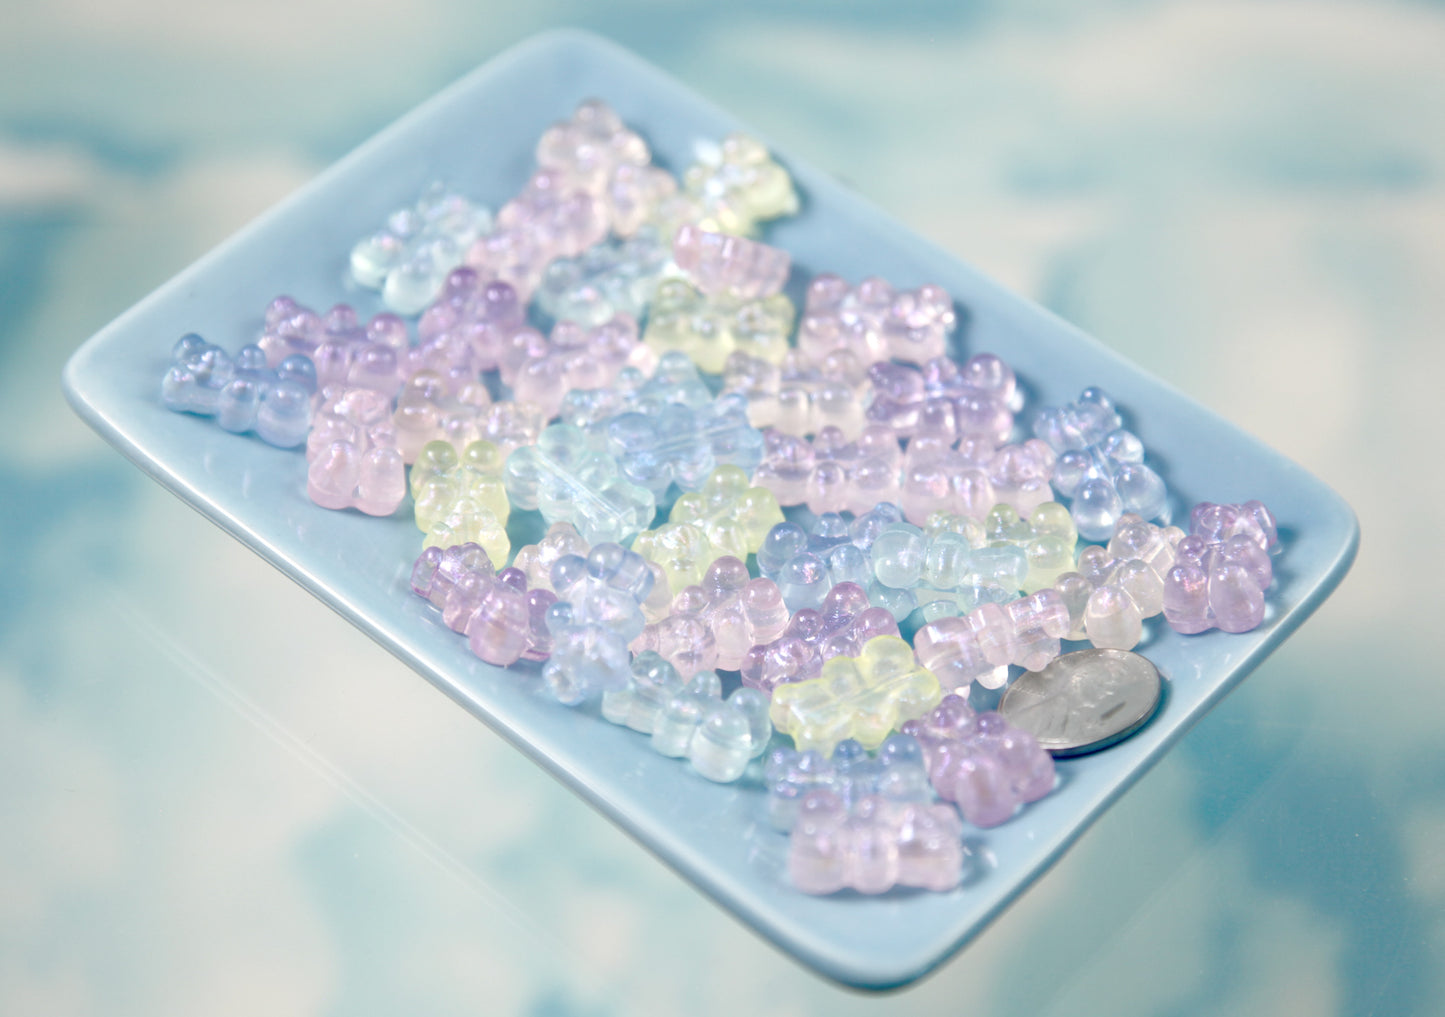 Pastel Gummy Bear Beads - 18mm Pastel Shimmer Fake Gummy Bears with Hole for Stringing - Fake Candy Resin Beads - 24 pc set